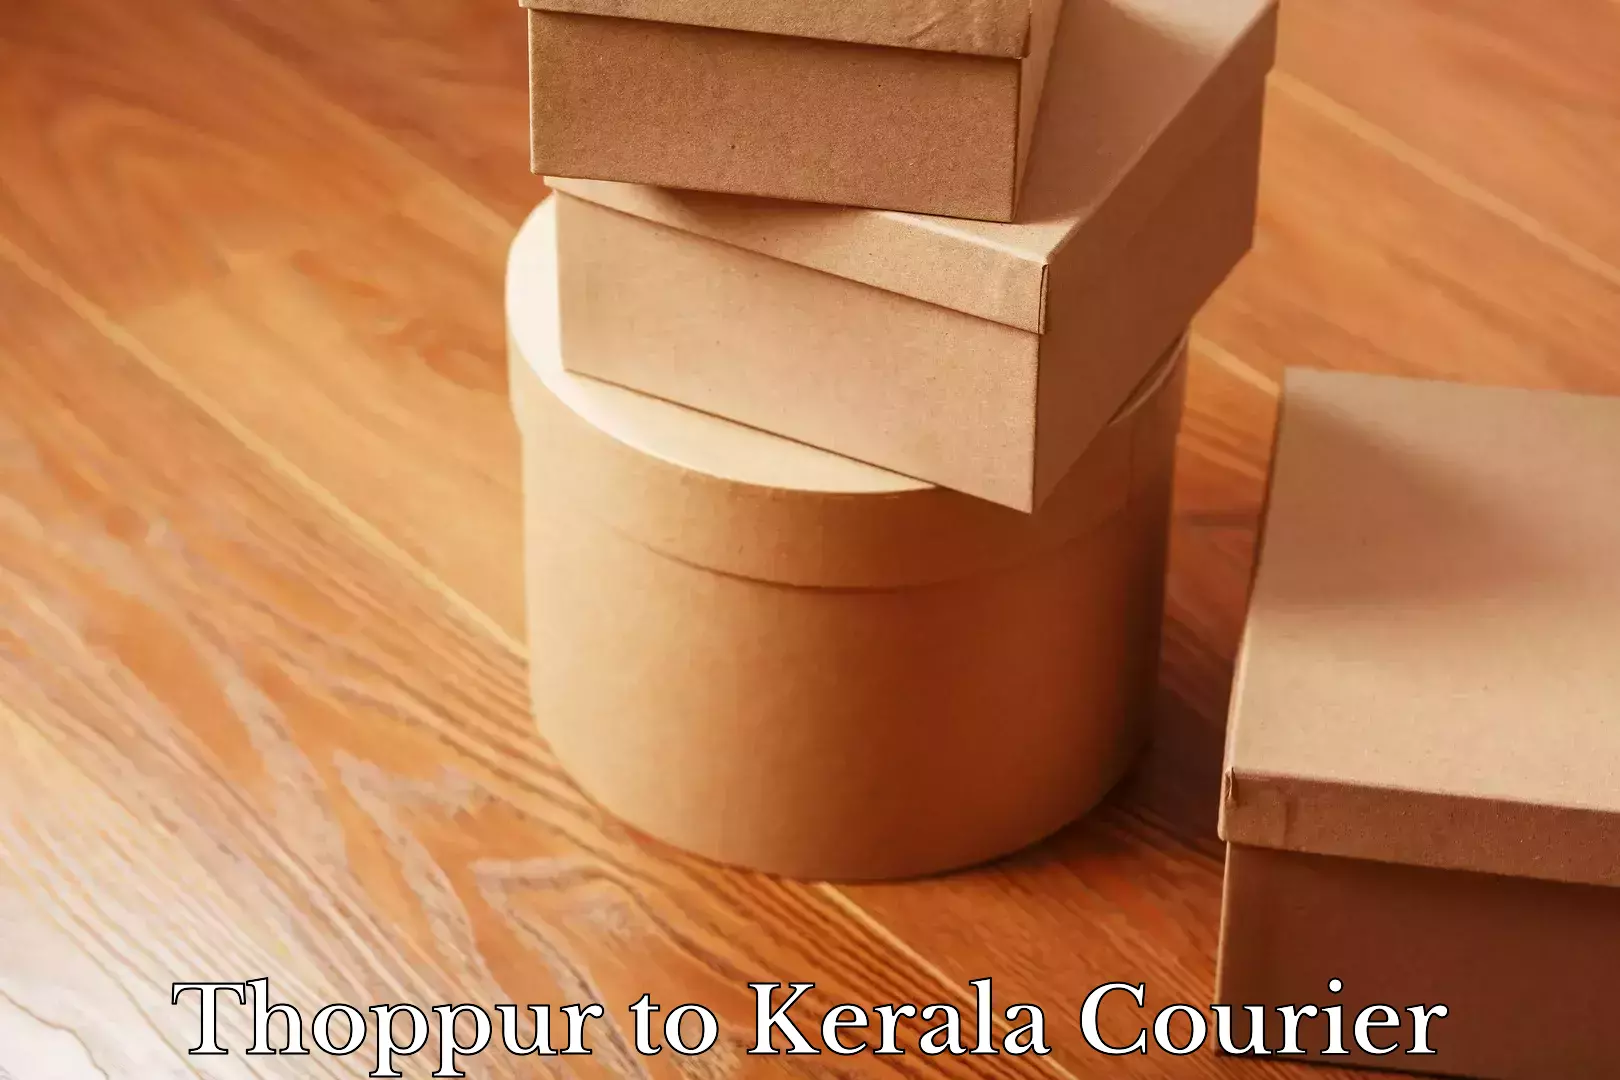 Cargo delivery service Thoppur to Kerala